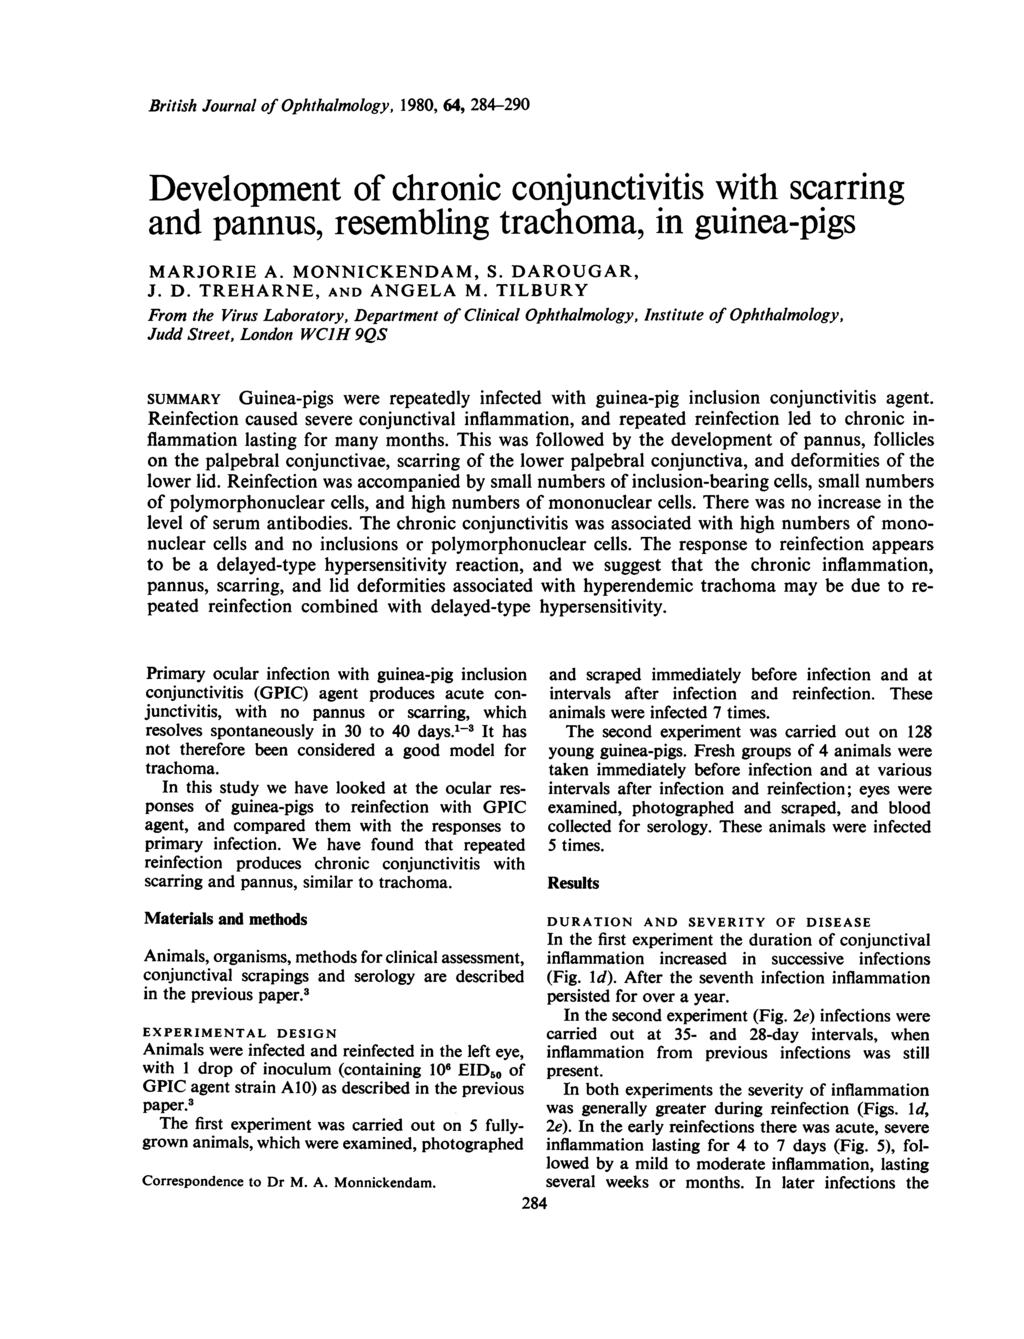 British Journal of Ophthalmology, 1980, 64, 284-290 Development of chronic conjunctivitis with scarring and pannus, resembling trachoma, in guinea-pigs MARJORIE A. MONNICKENDAM, S. DAROUGAR, J. D. TREHARNE, AND ANGELA M.